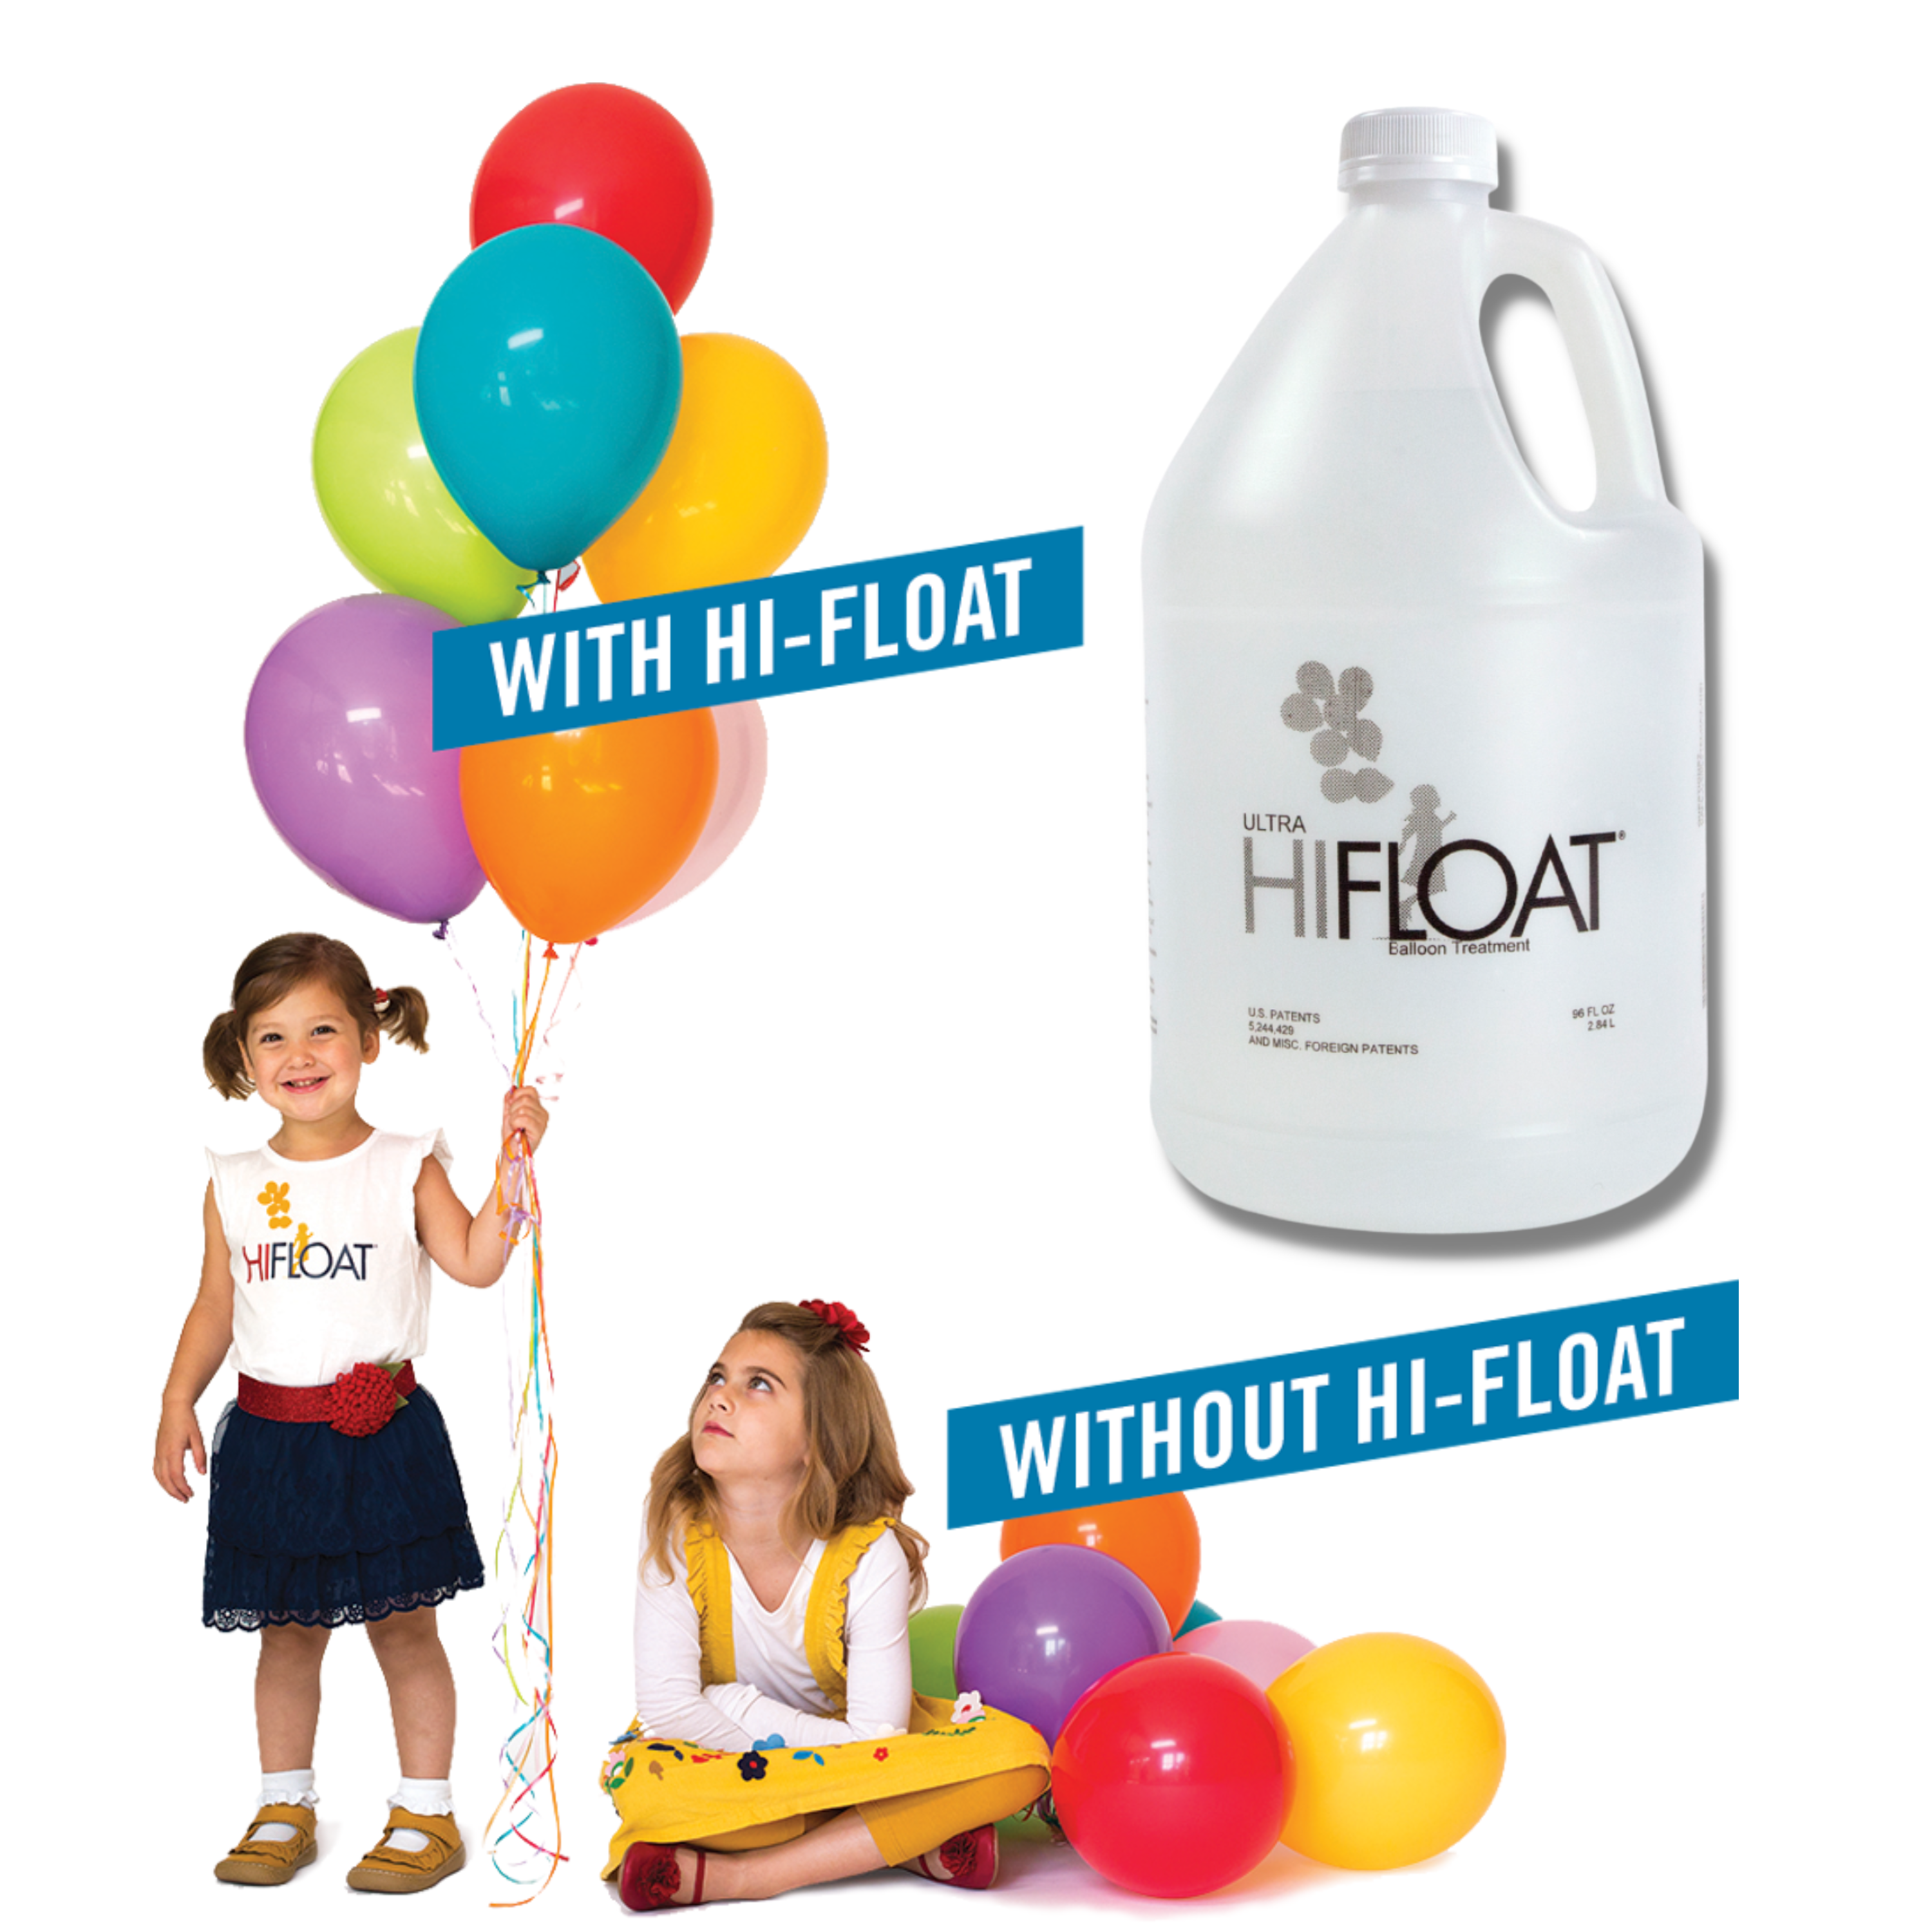 Buy Hi-Shine Aerosol Can 12oz (does not ship express) for only 14.5 USD by  Hi-Float - Balloons Online